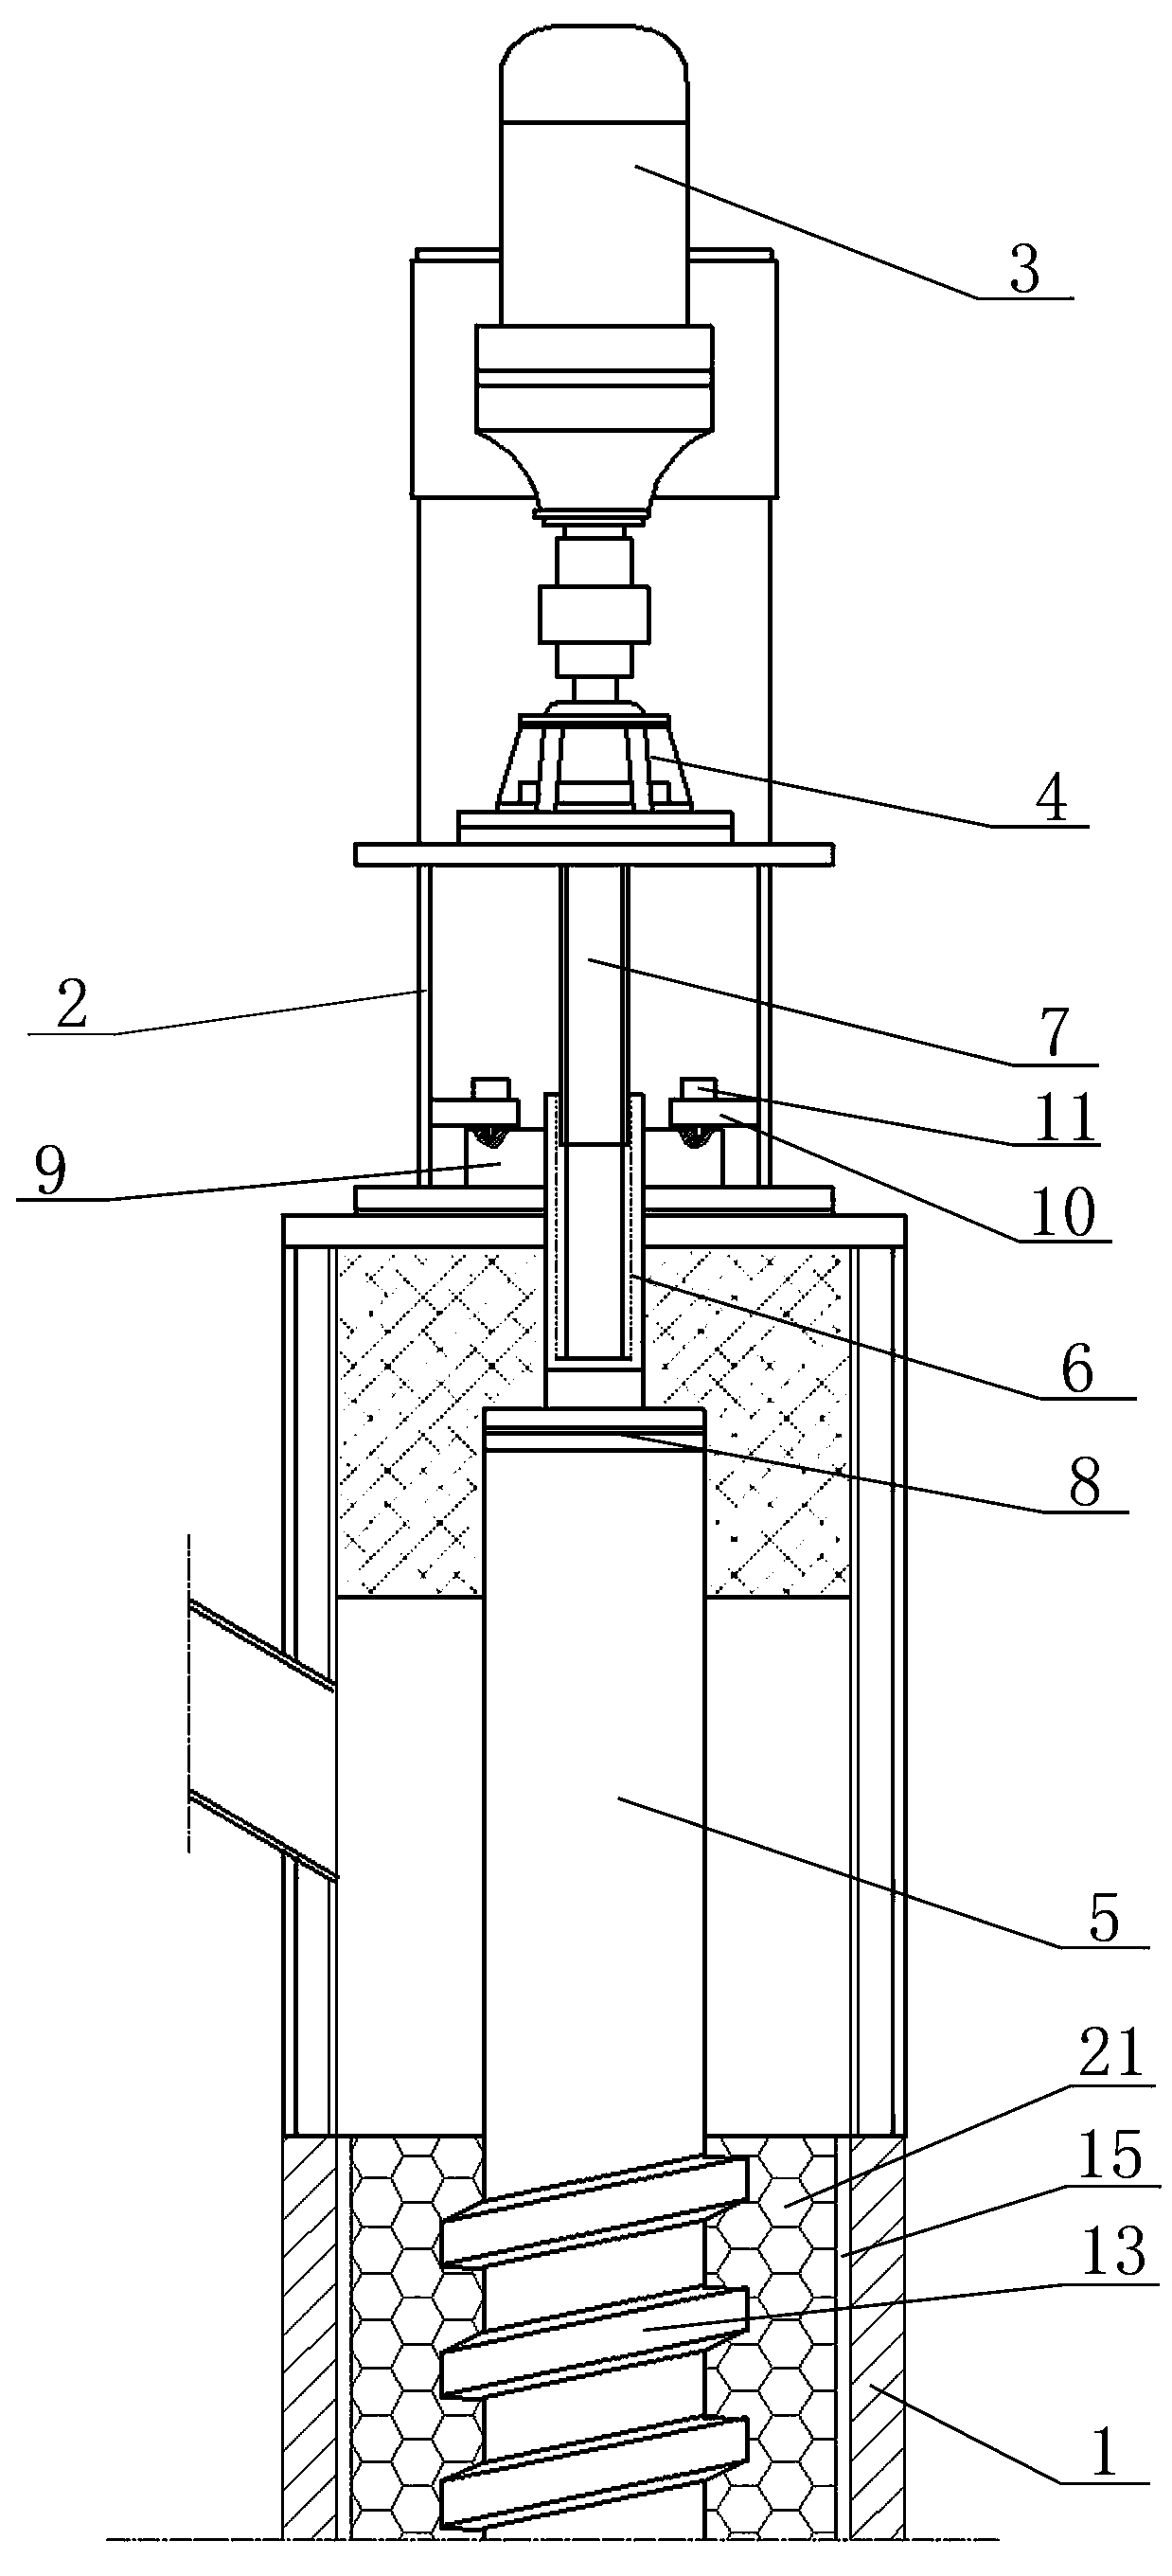 Reduction tank assembly with rotating stirring inner core structure for vertical reduction furnace